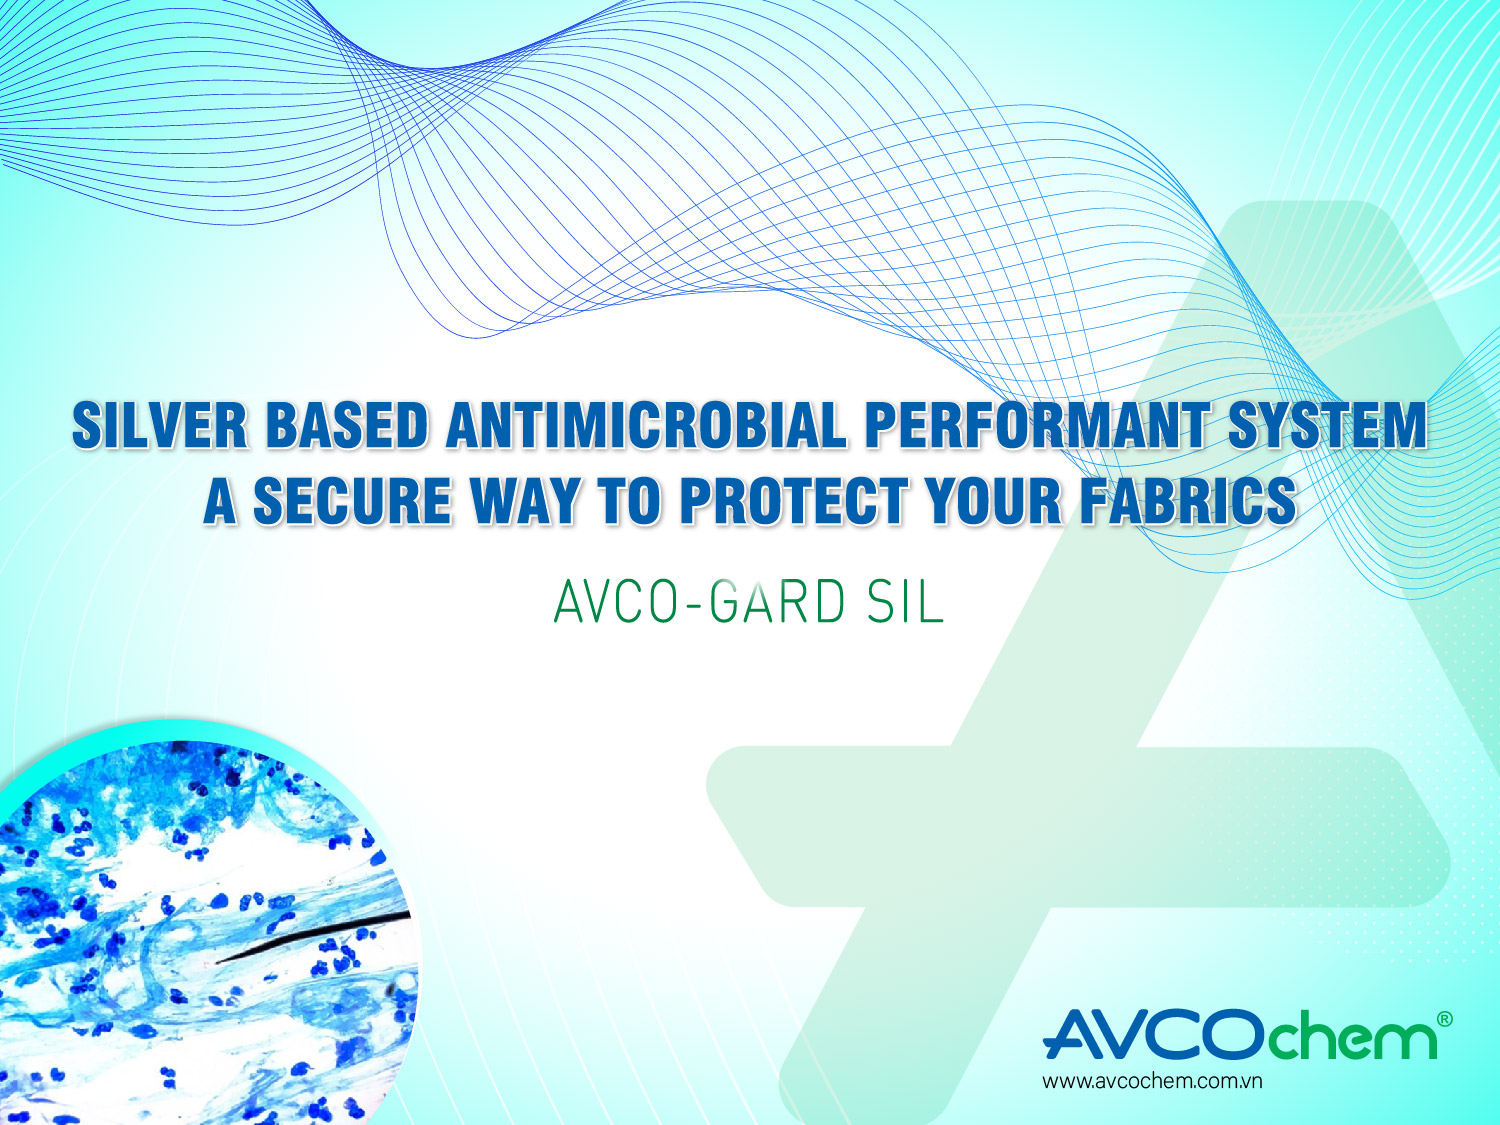 SILVER BASED ANTI-MICROBIAL PERFORMANT SYSTEM - A SECURE WAY TO PROTECT YOUR FABRICS